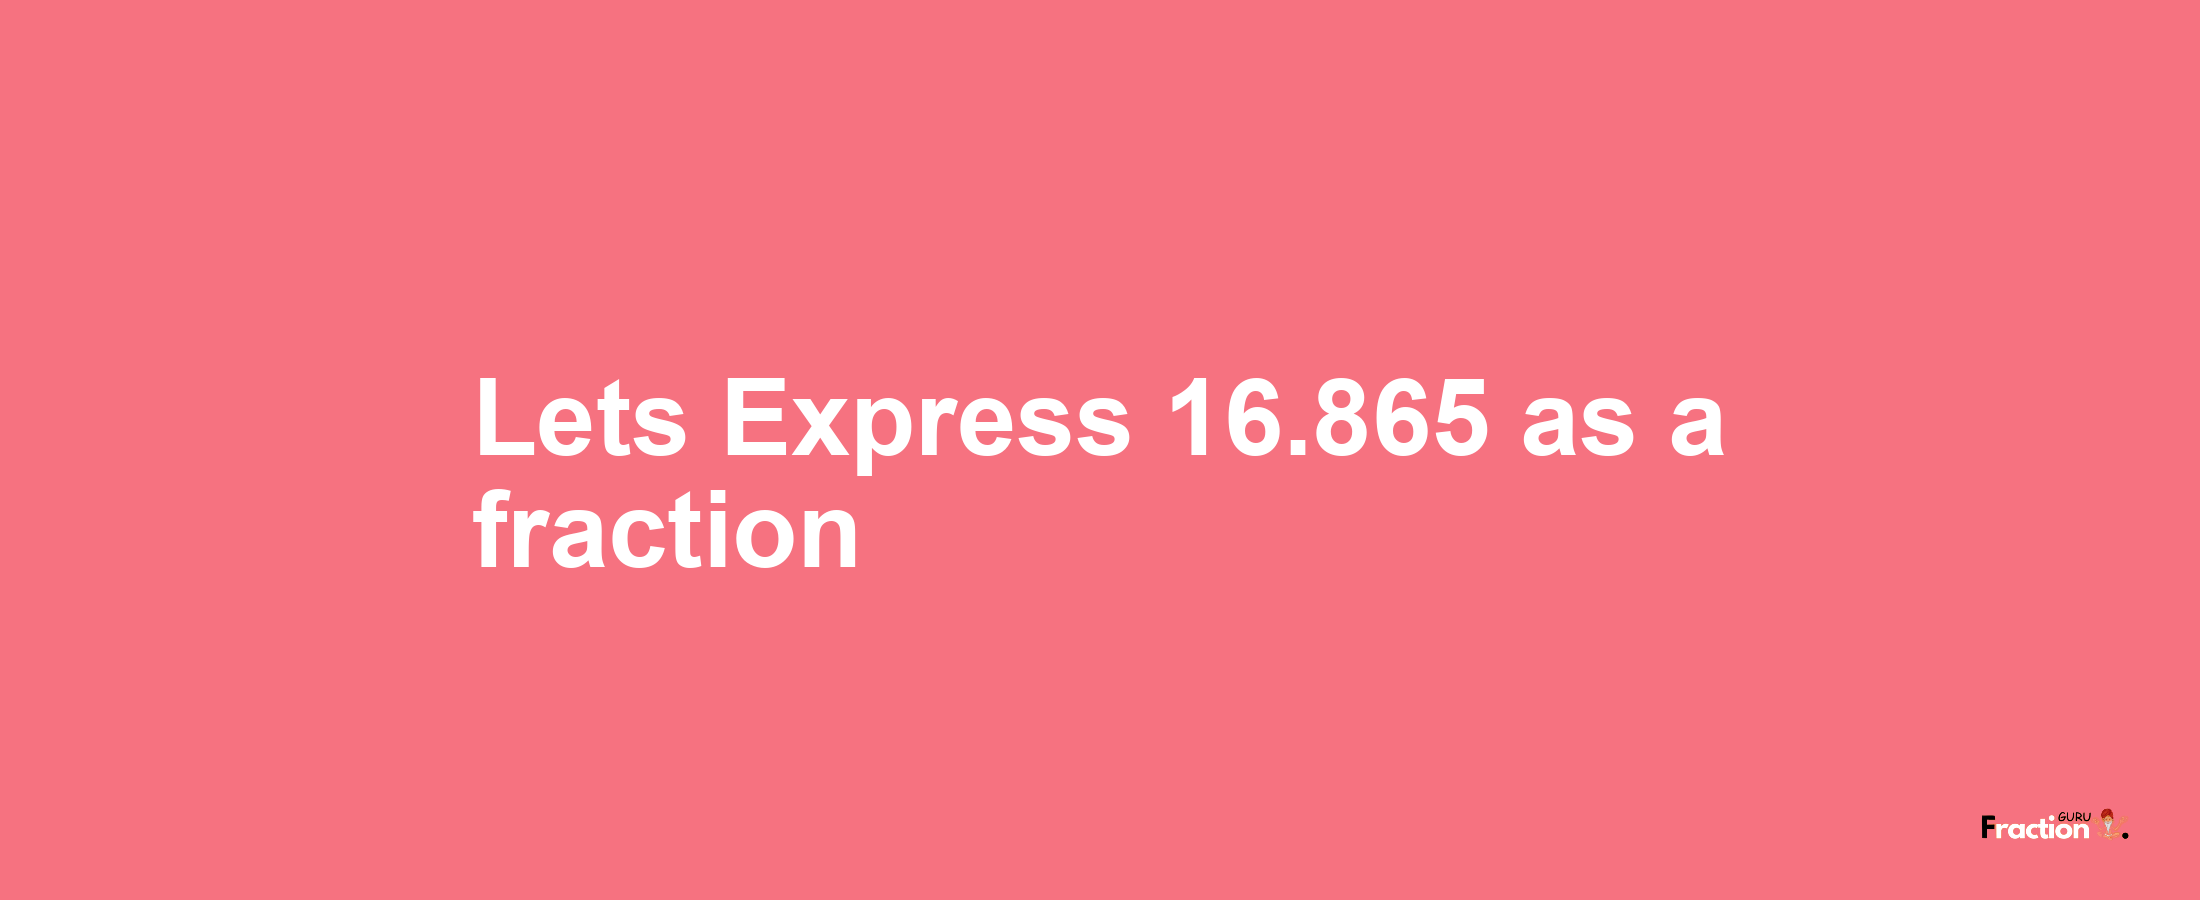 Lets Express 16.865 as afraction